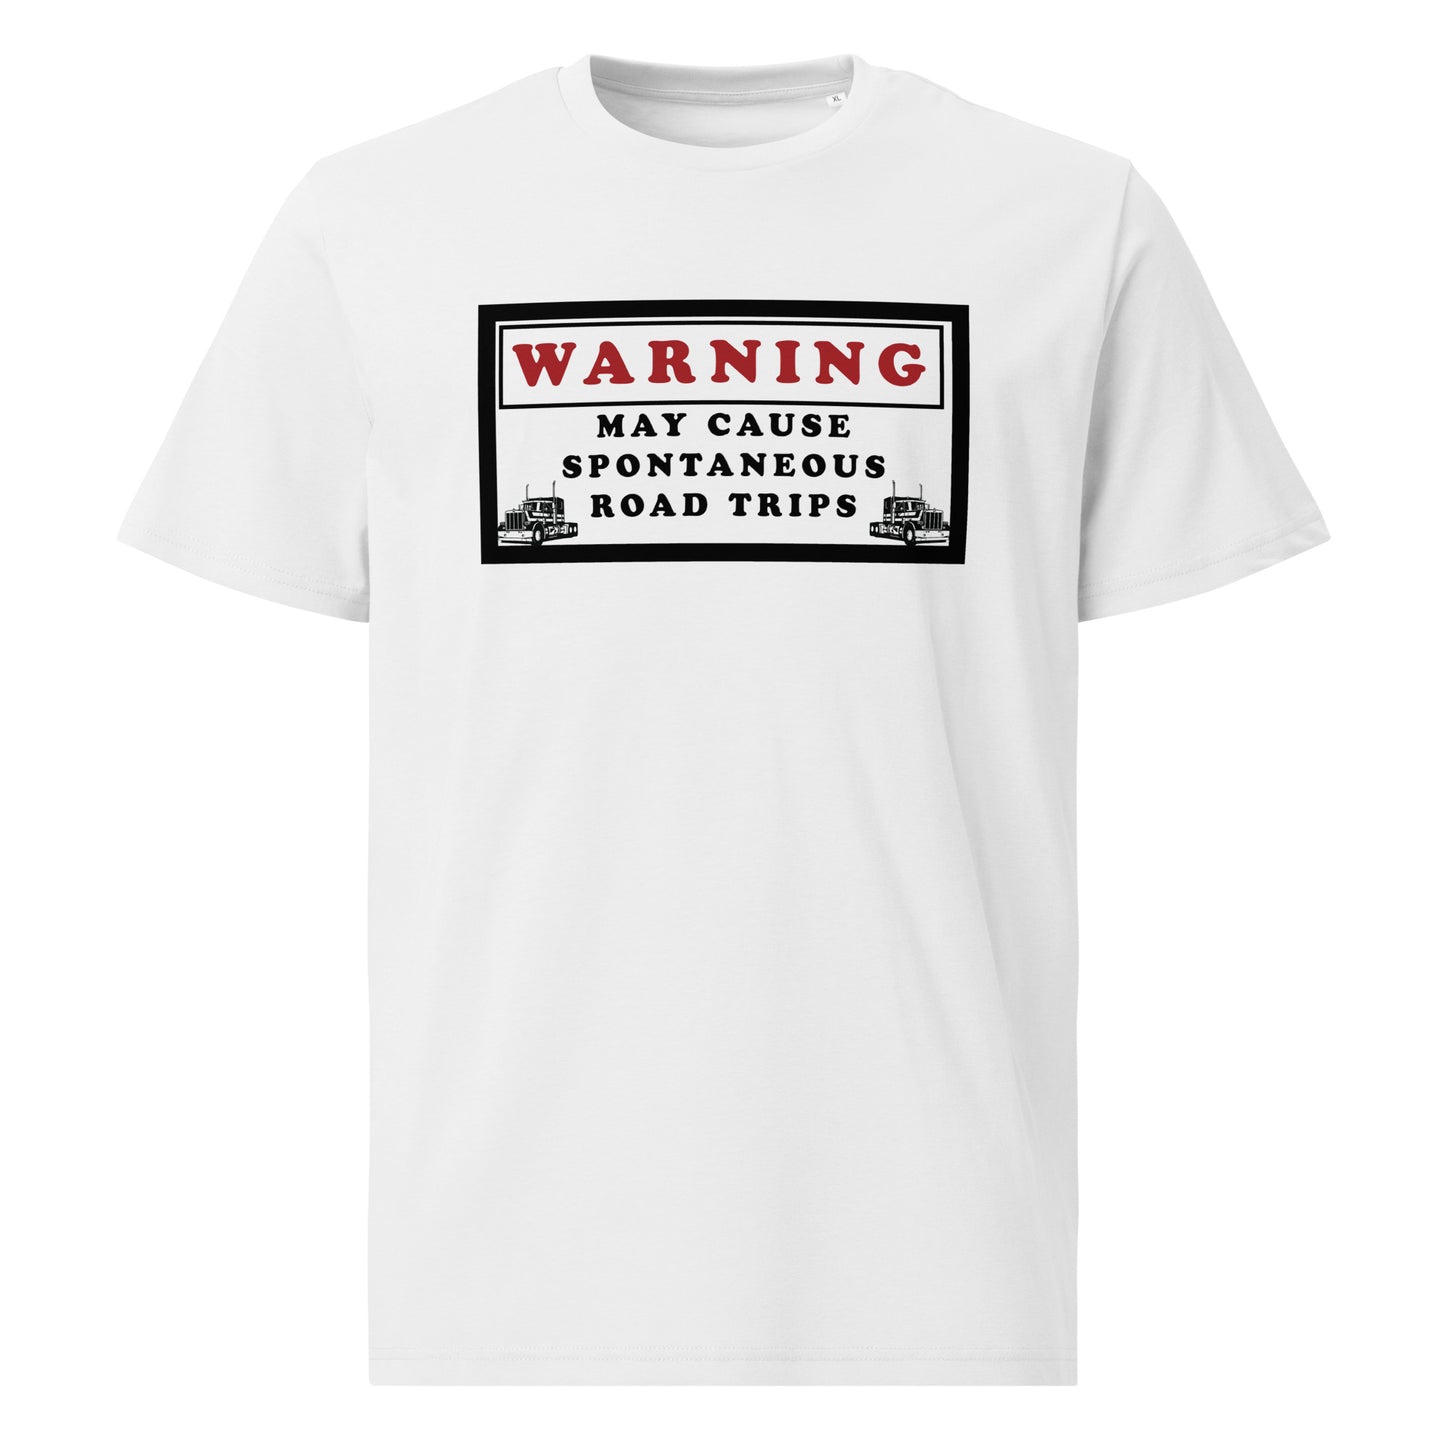 MAY CAUSE SPONTANEOUS ROAD TRIPS cotton t-shirt